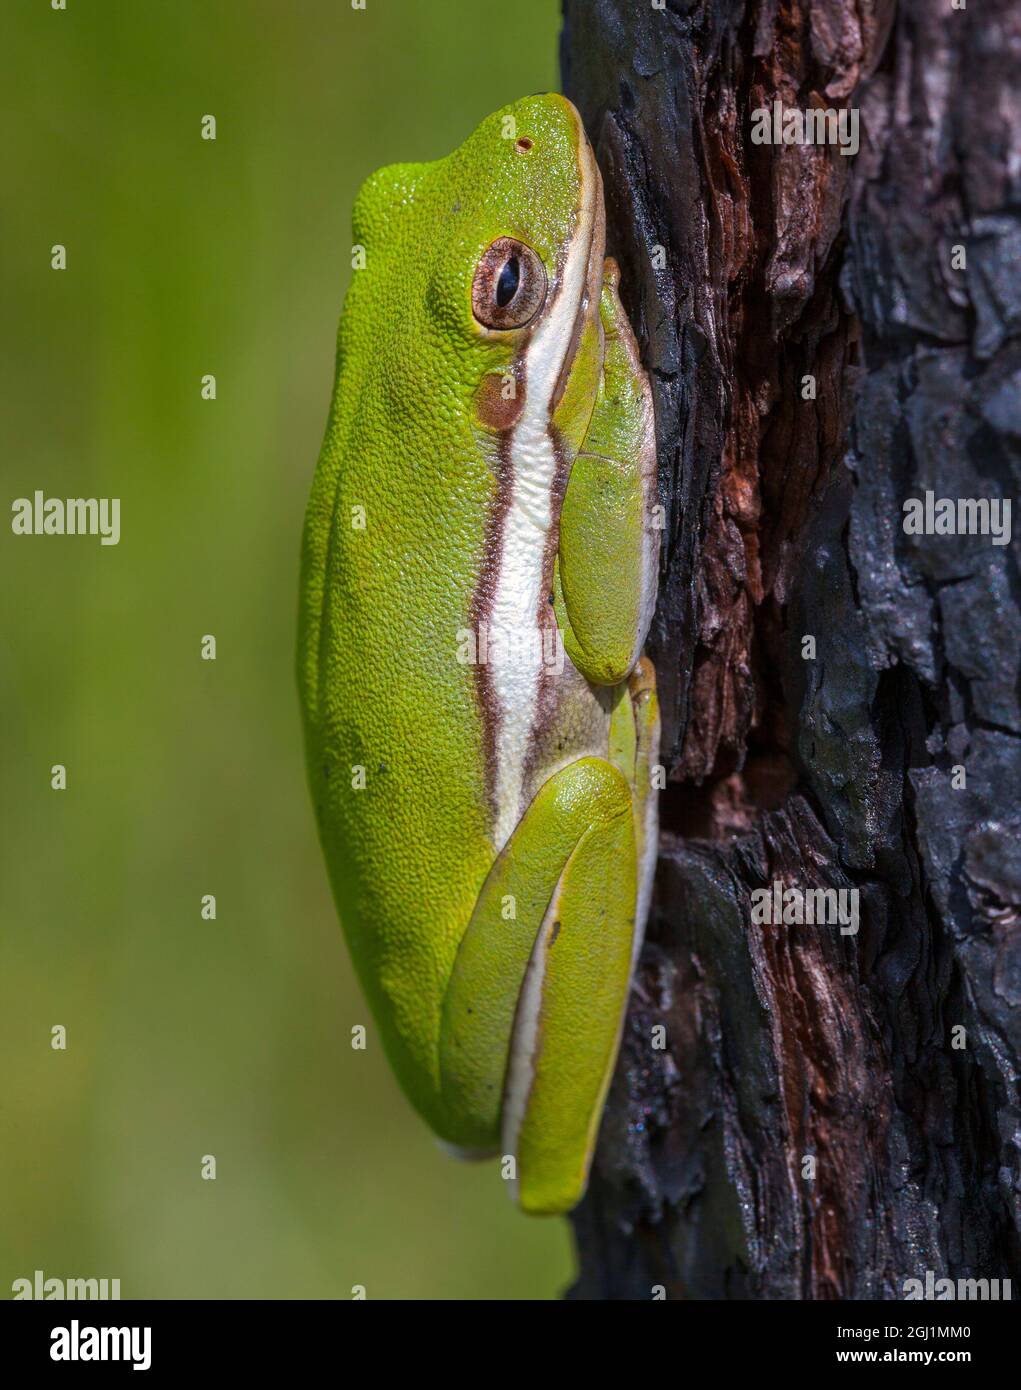 A green treefrog takes refuge among the furrows of bark of a slash pine tree in southern, Florida. Stock Photo